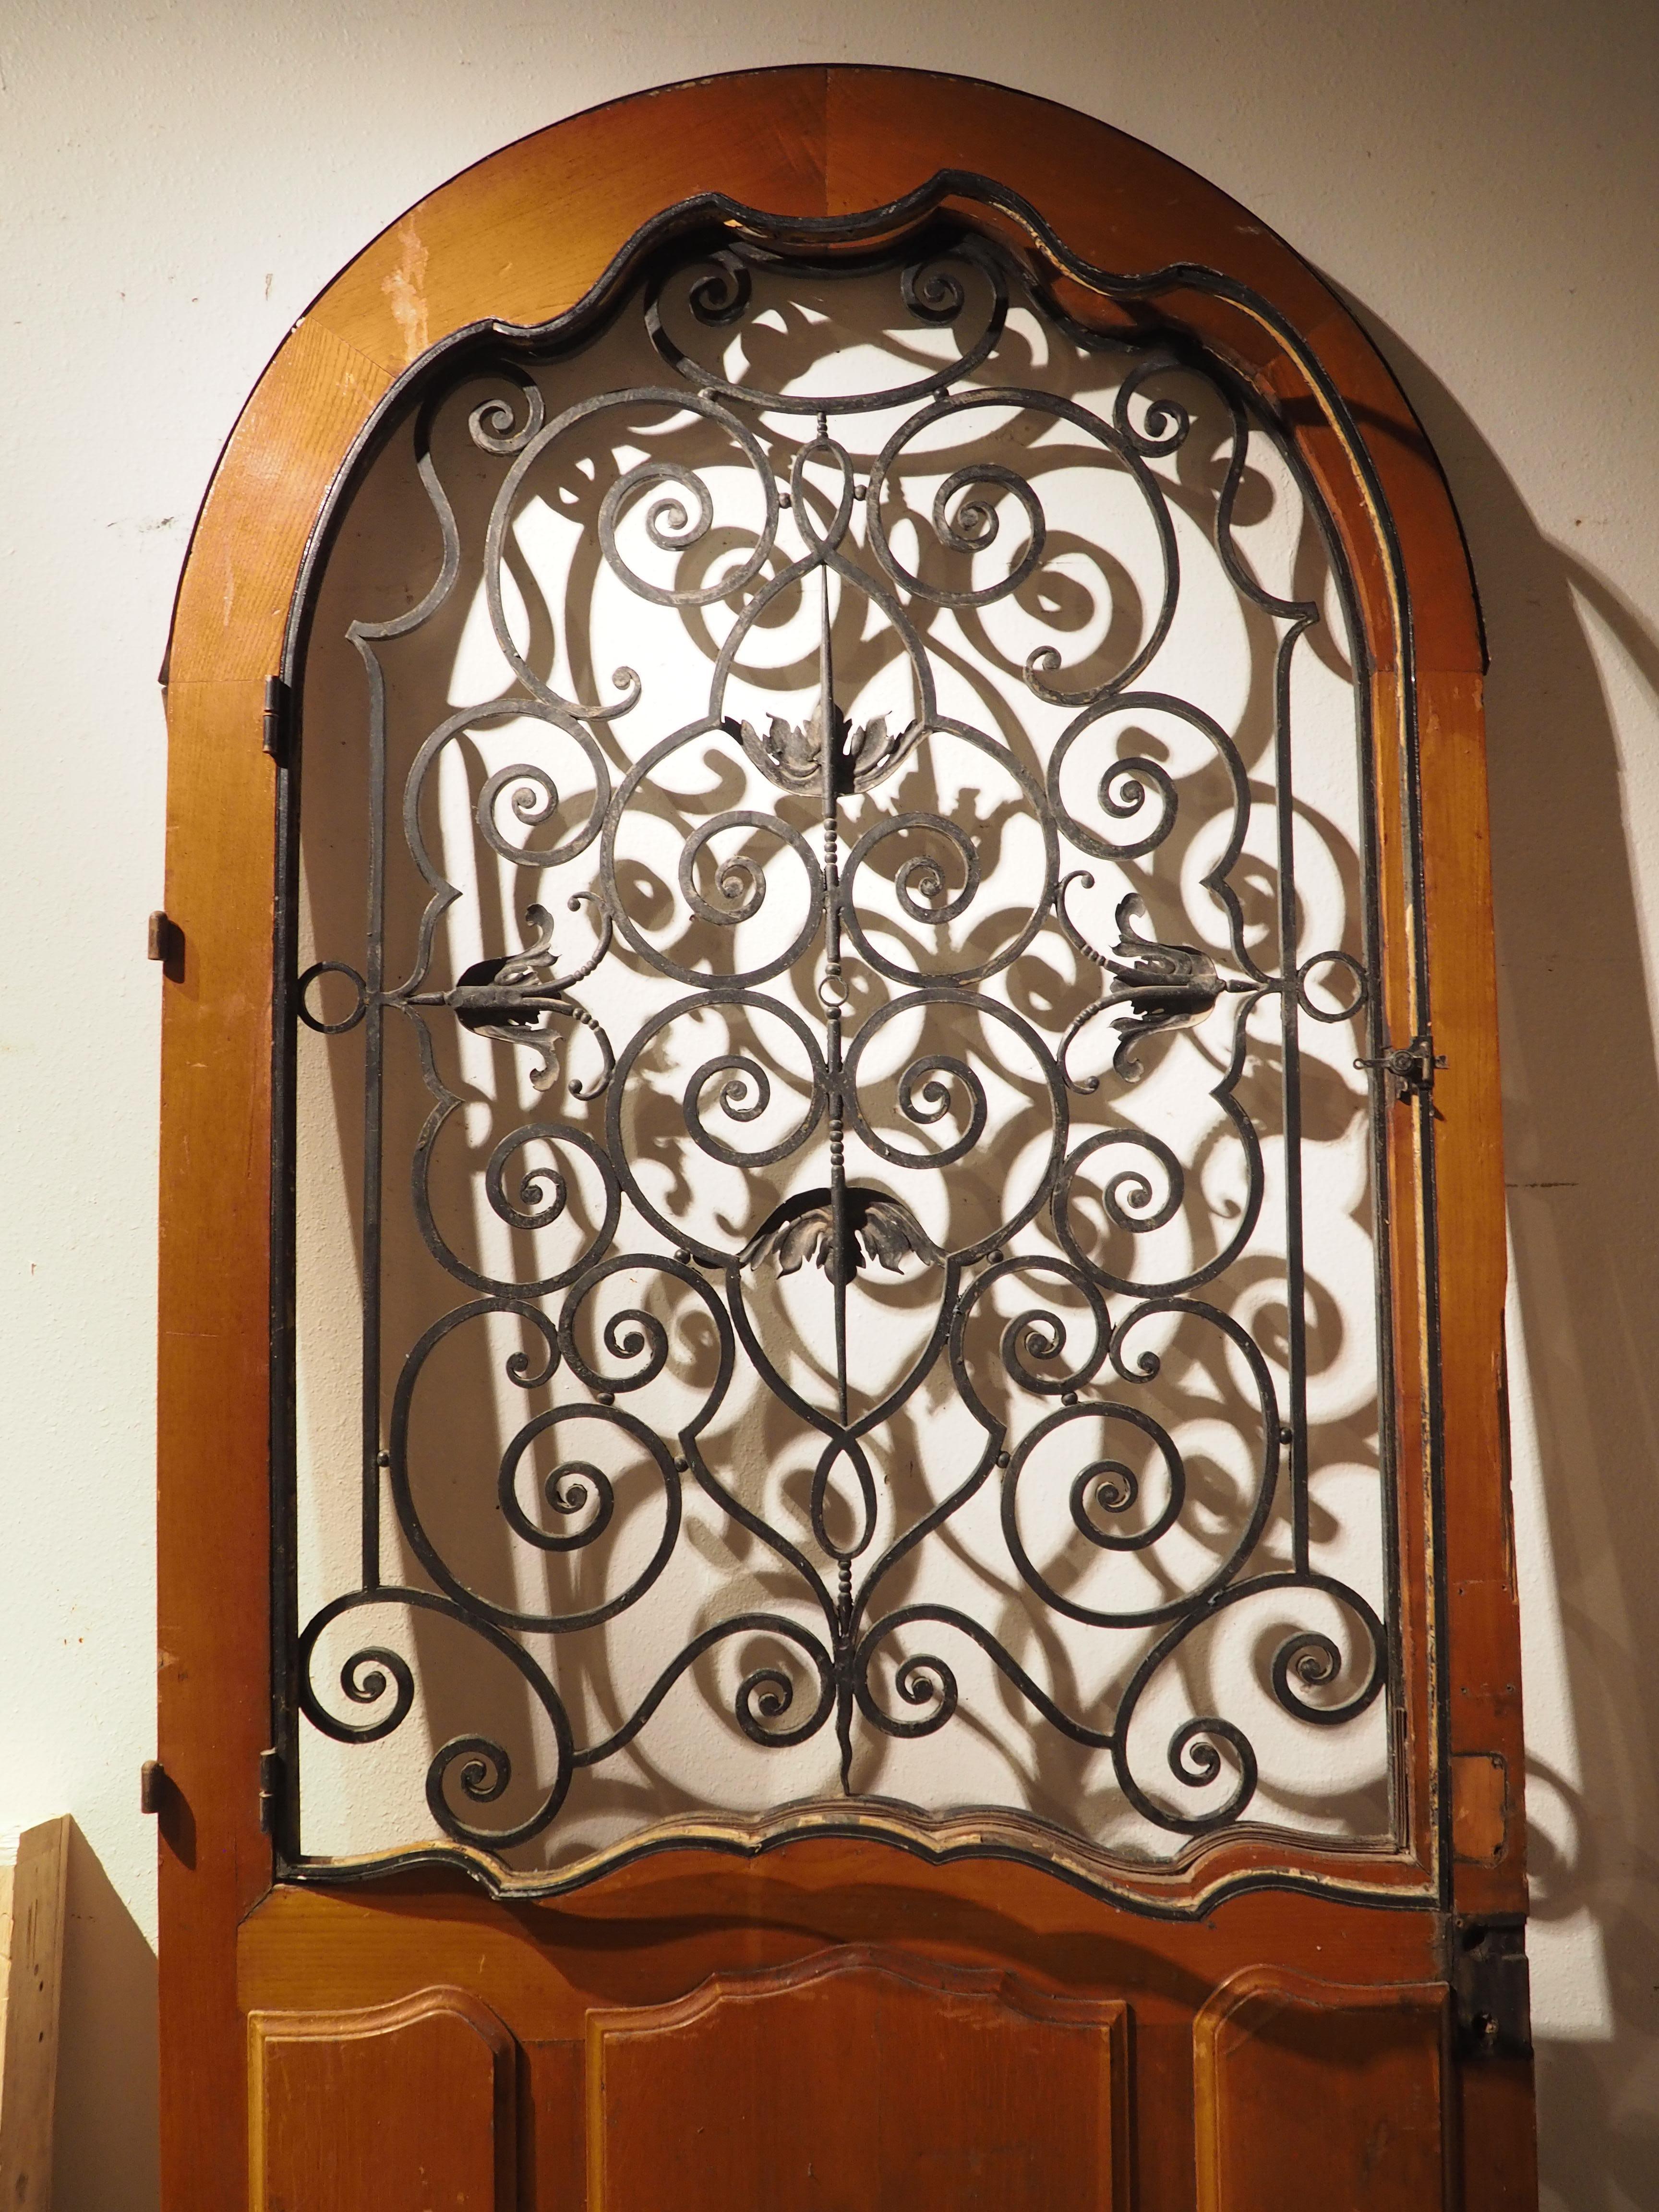 This large entry door was found in the South of France and was constructed from oak, iron, and originally, glass. It has a pleasing arched top with a beautifully carved upper frame and lower section, while the upper half consists of shaped wrought